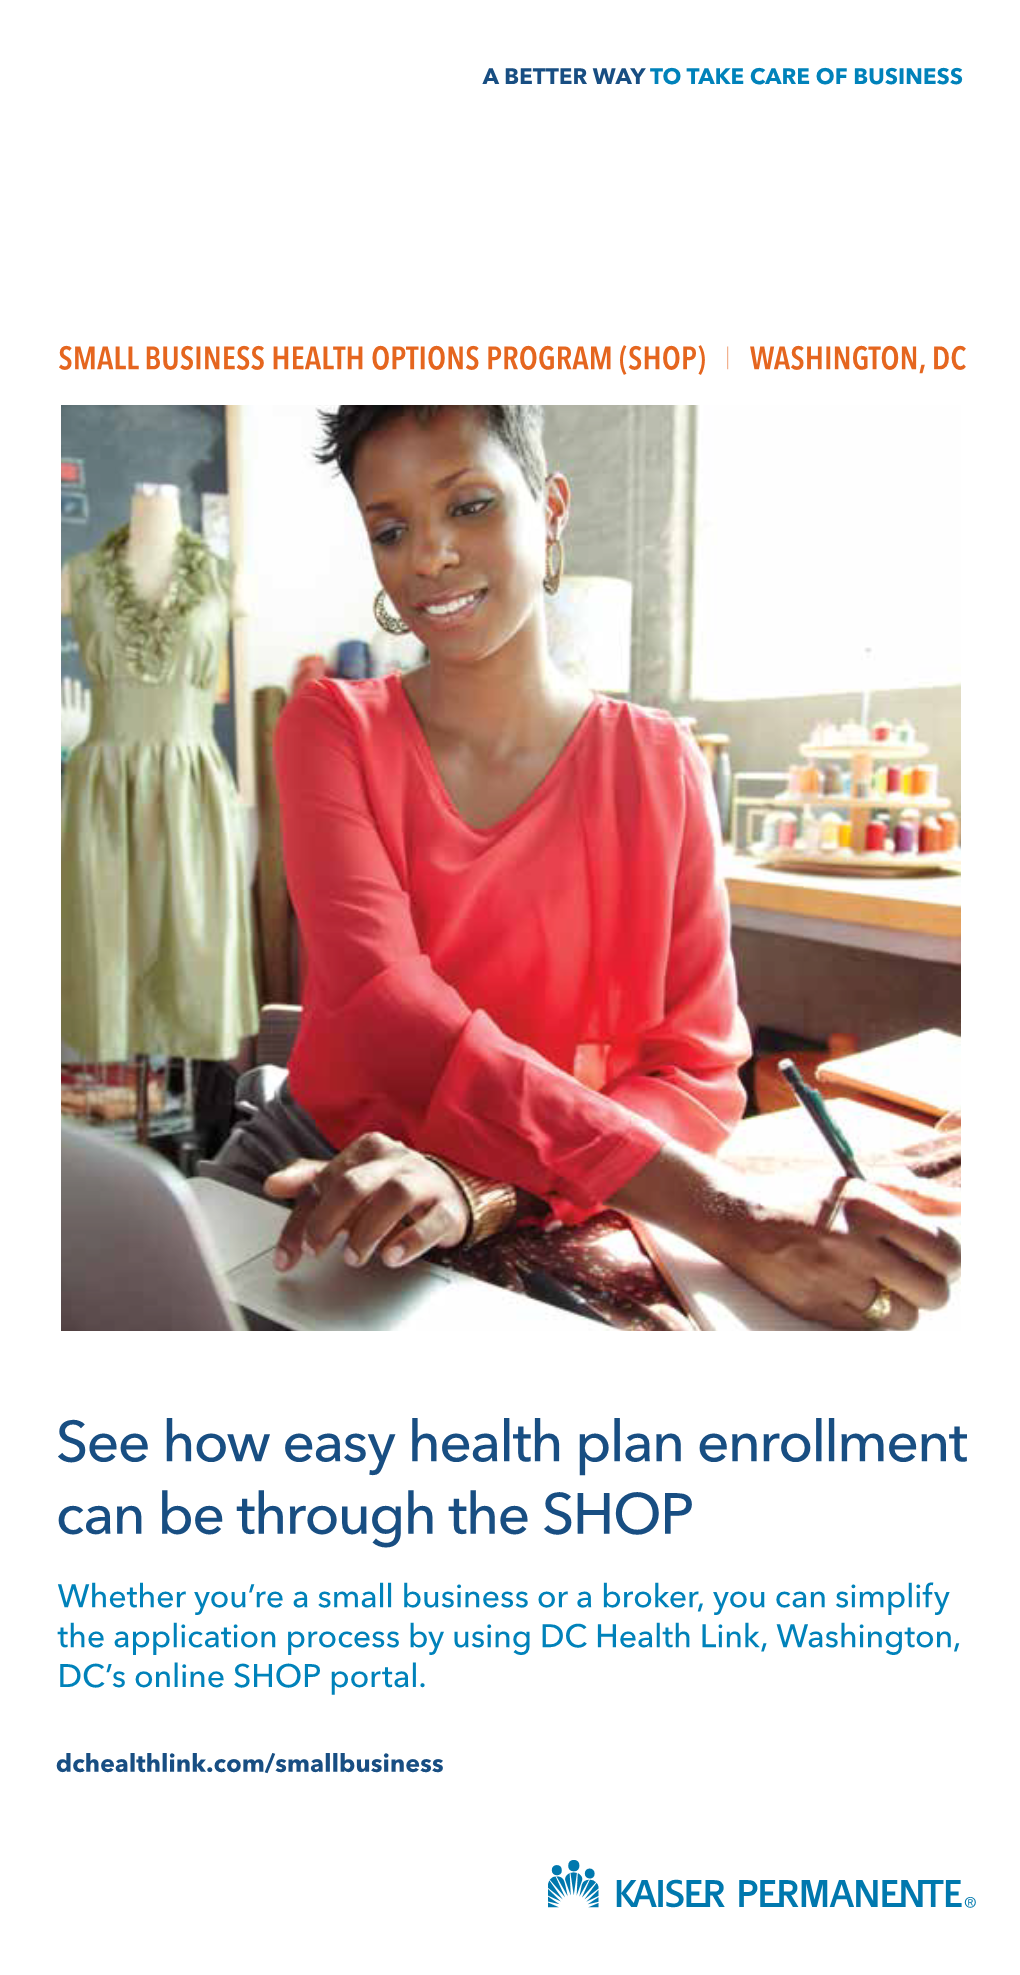 See How Easy Health Plan Enrollment Can Be Through the SHOP